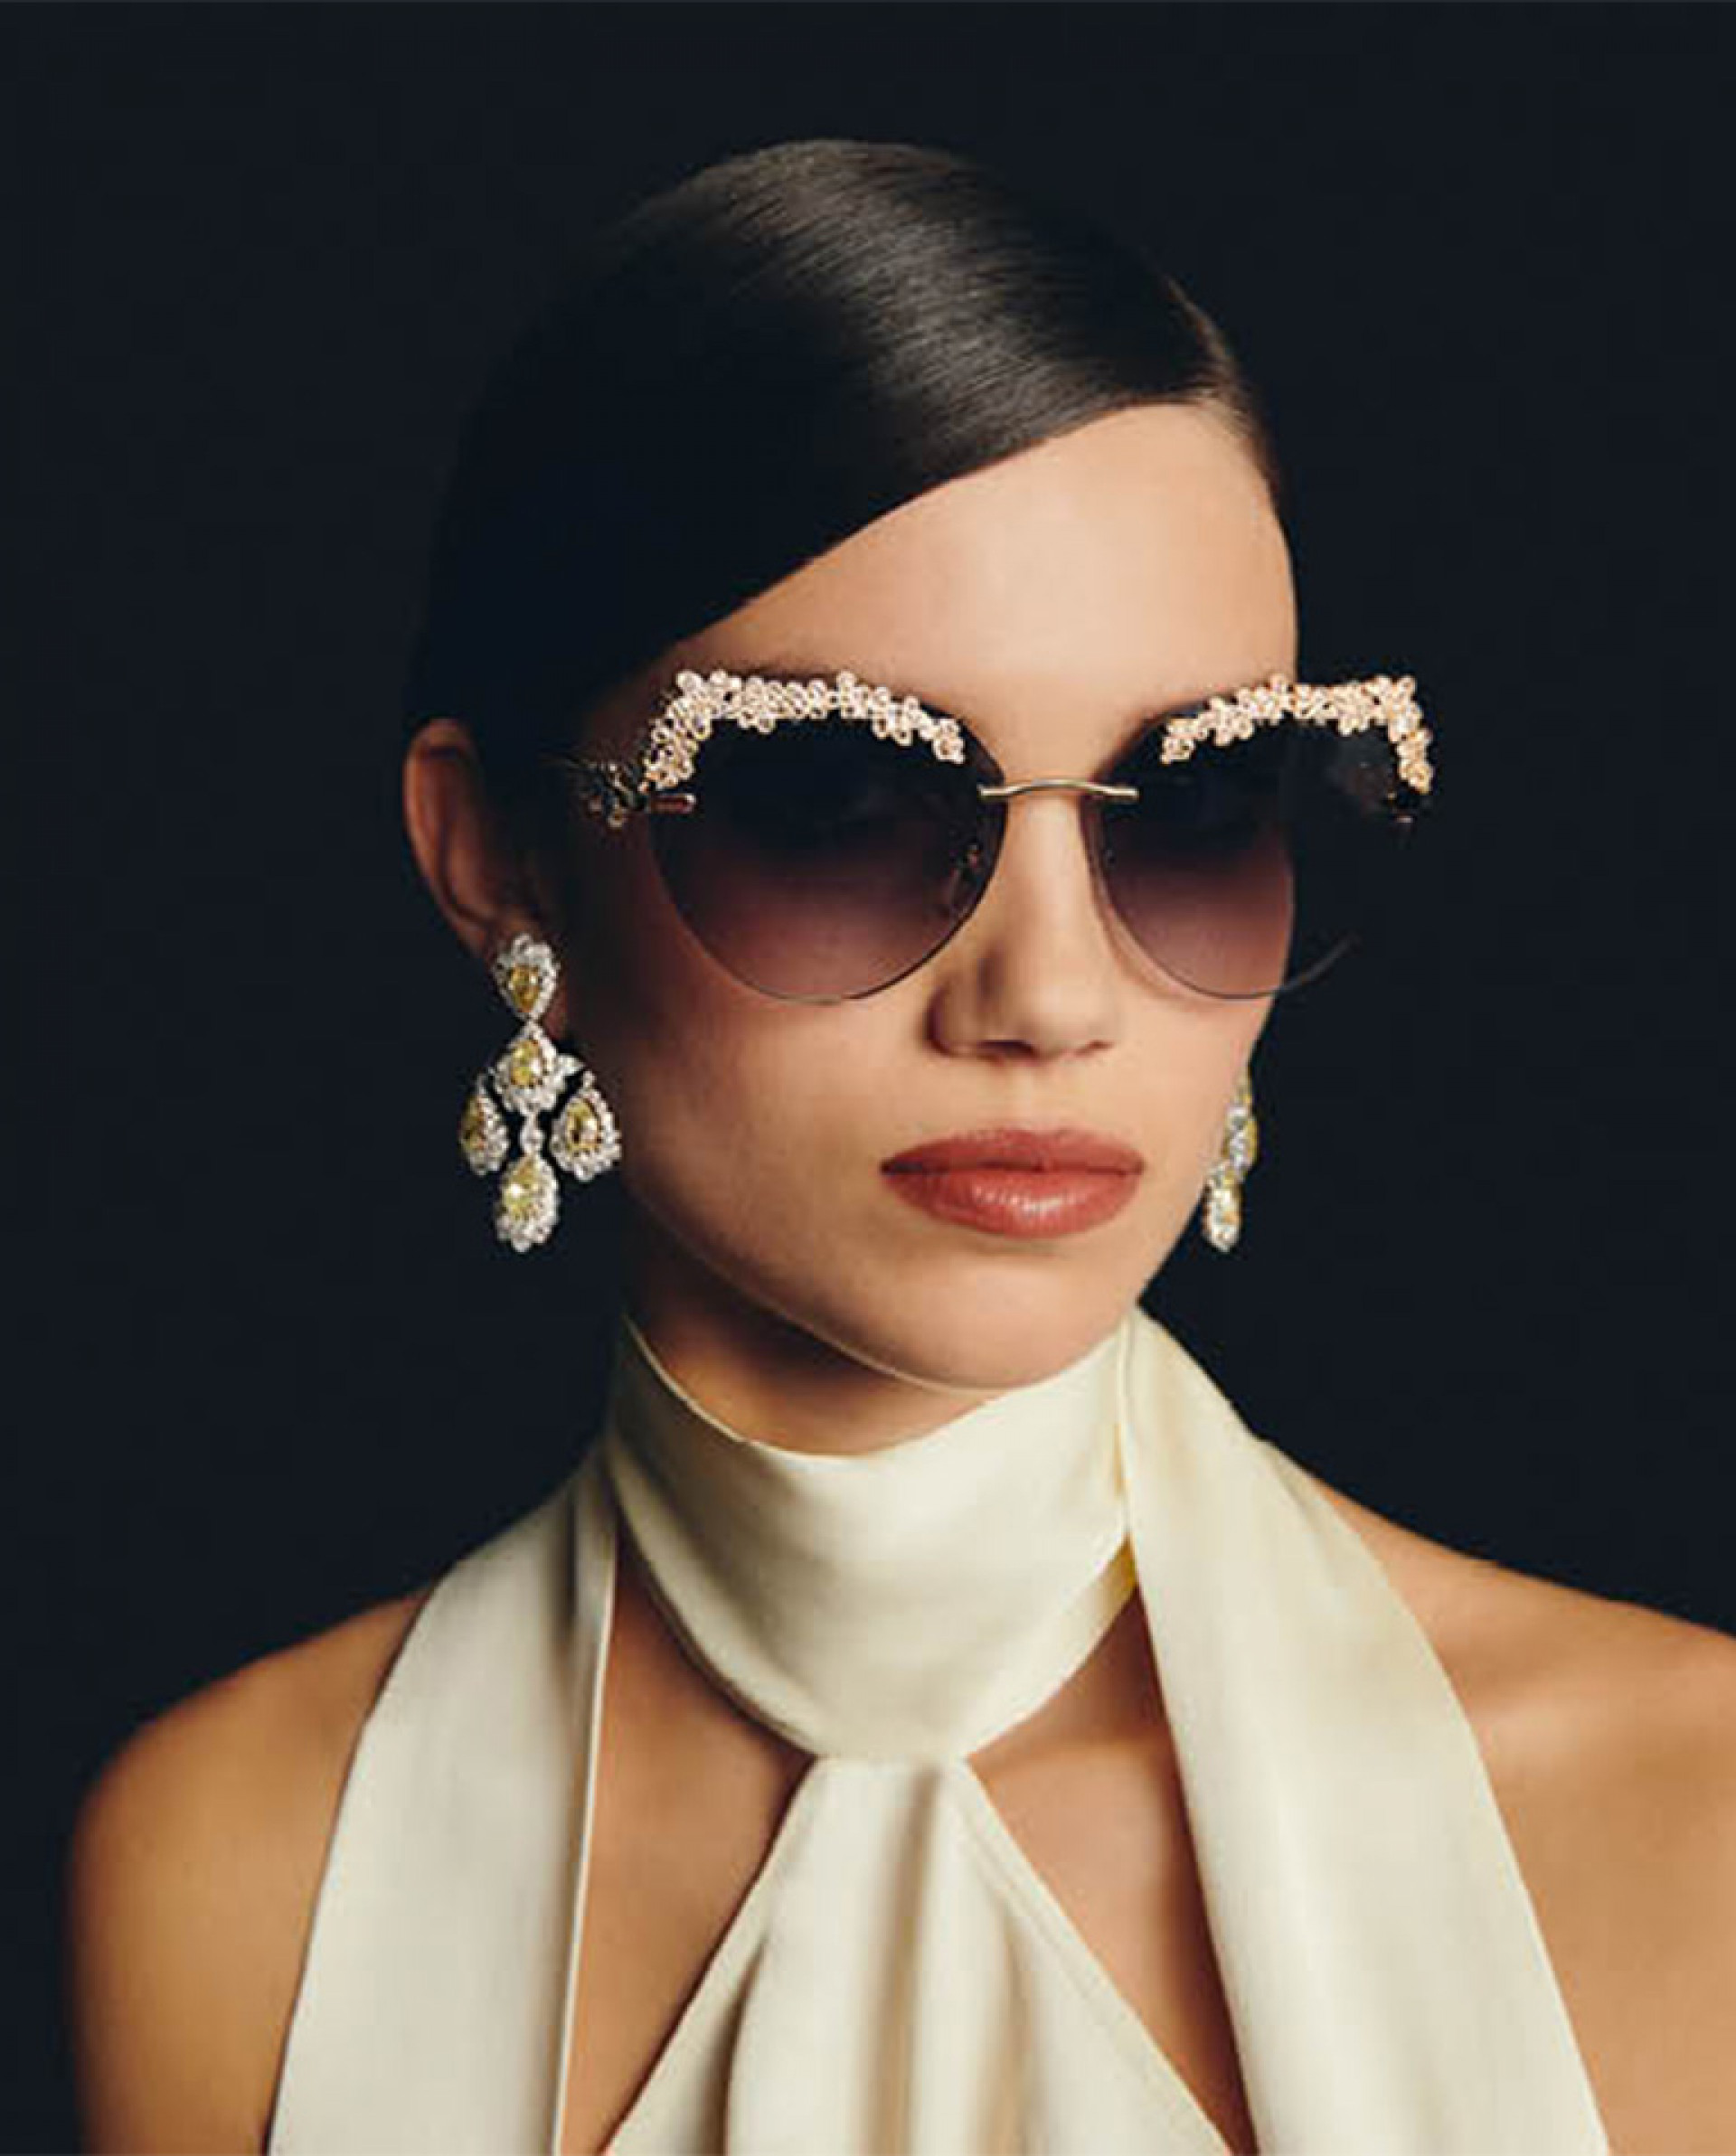 The quintessence of glamour at Cannes 2024 with Chopard's "Red carpet" sunglasses